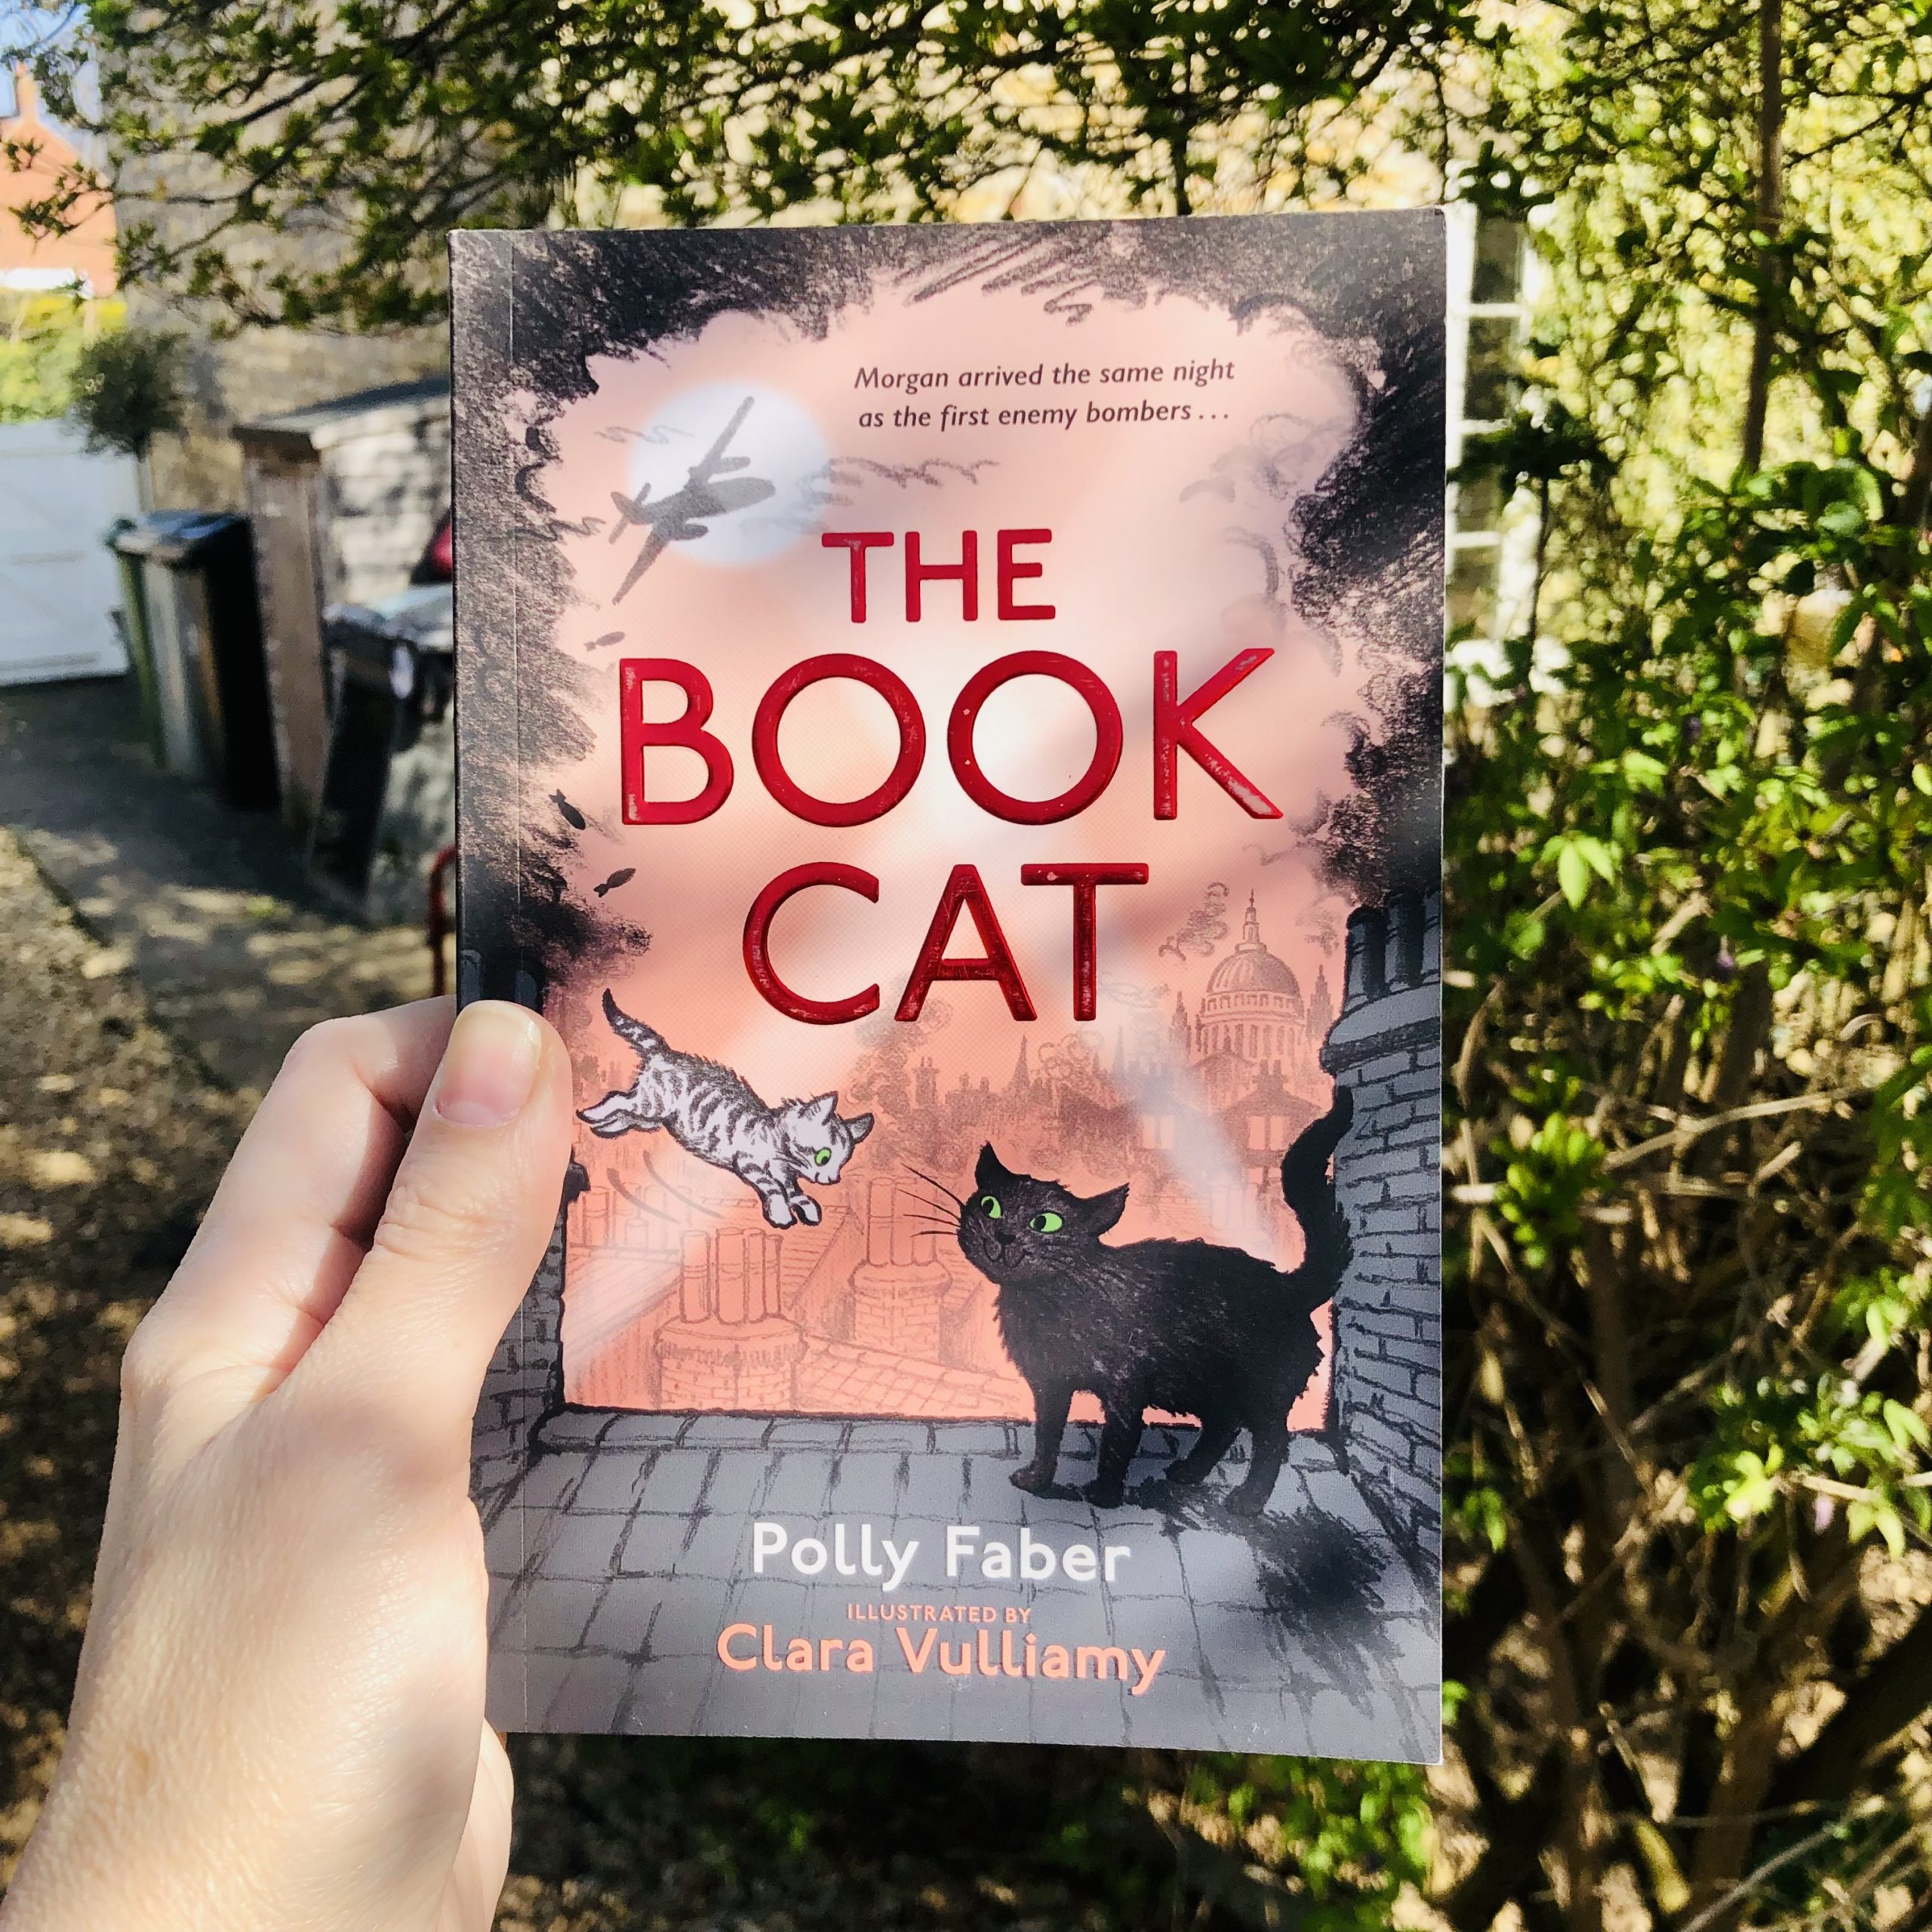 The Book Cat by Polly Faber